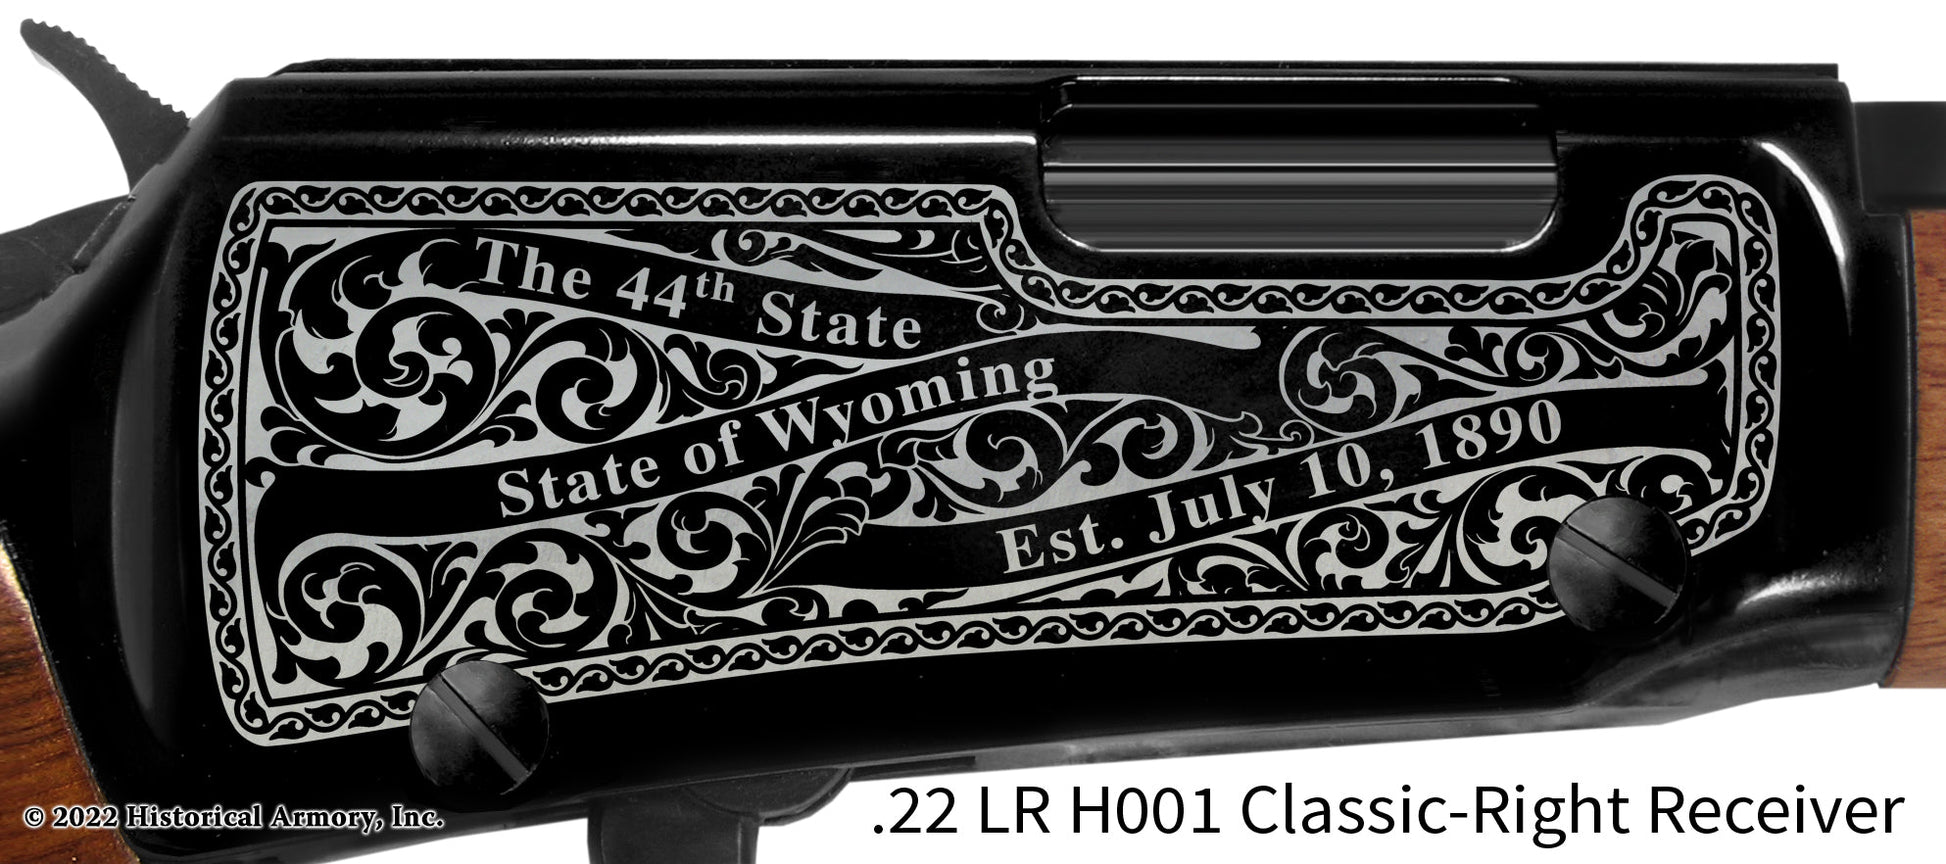 Sweetwater County Wyoming Engraved Henry H001 Rifle